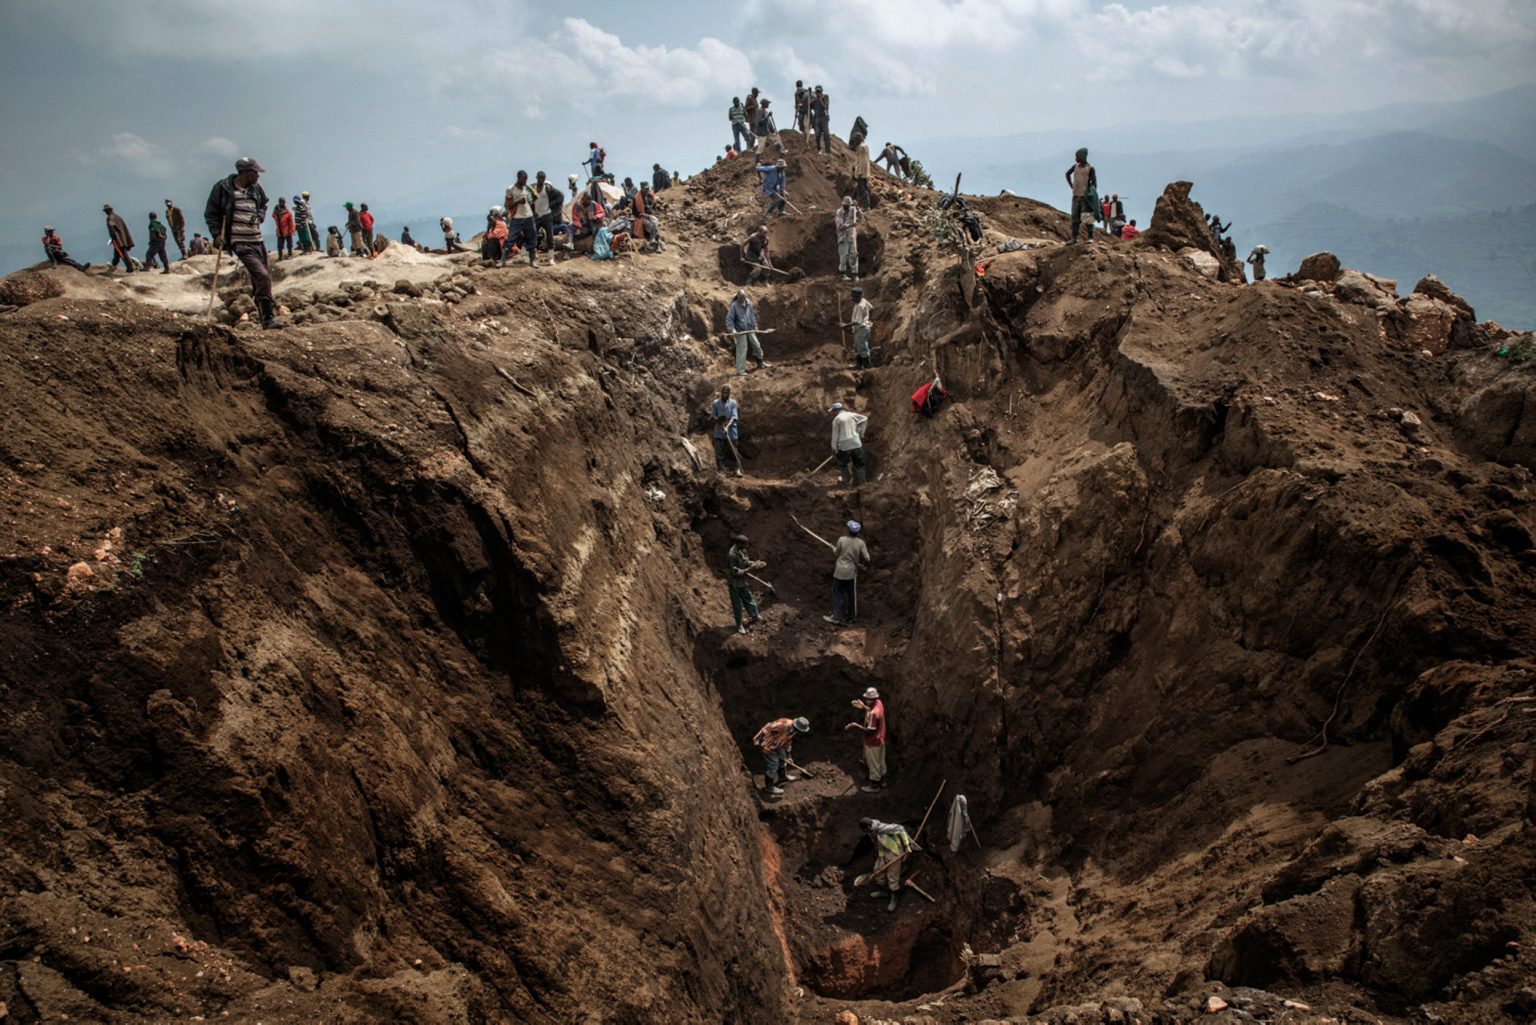 Workers exiting a mine shaft. Miners dig 50 meters underground for the minerals before transporting them to a nearby river where they are separated from rocks and sand before being sold to dealers. Mine accidents are common.  Rubaya, Republic Democratic of Congo, 2013